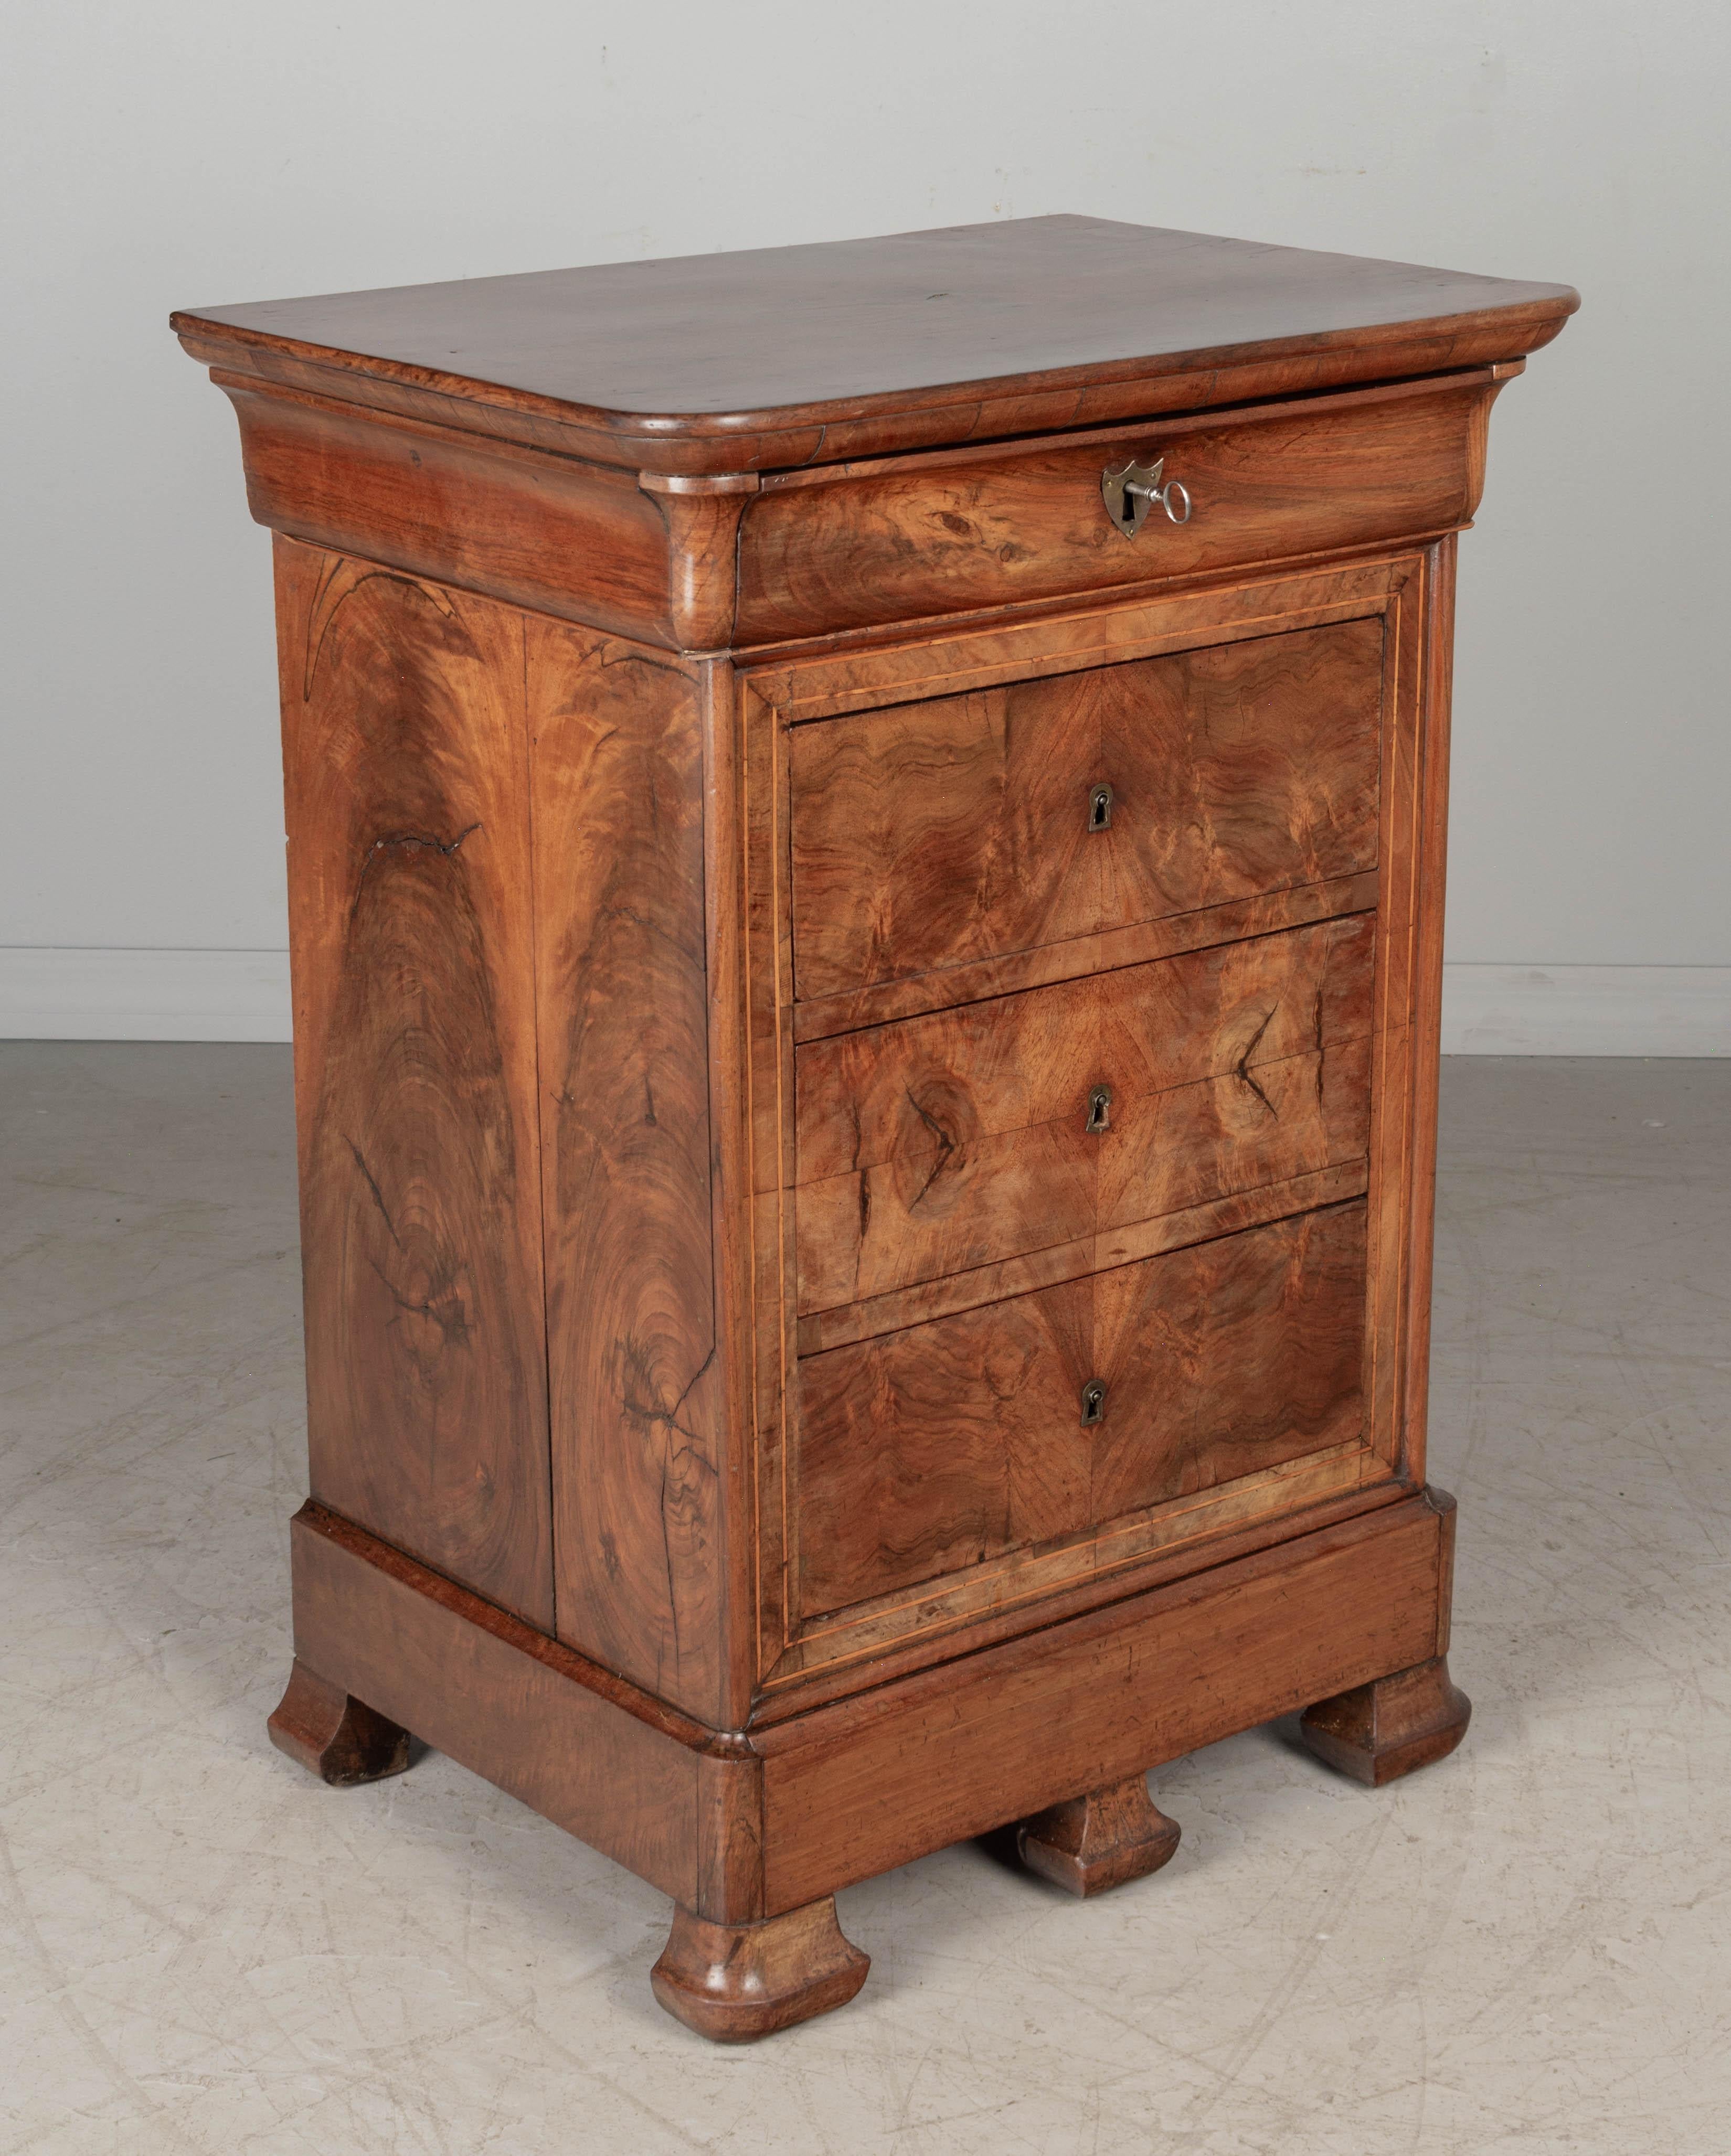 An early 19th century French Louis Philippe small commode, or stand, made of solid walnut with book-matched veneer of walnut. Four dovetailed drawers with working locks and one key and a bottom pullout with concealed compartment. Beautiful patterned